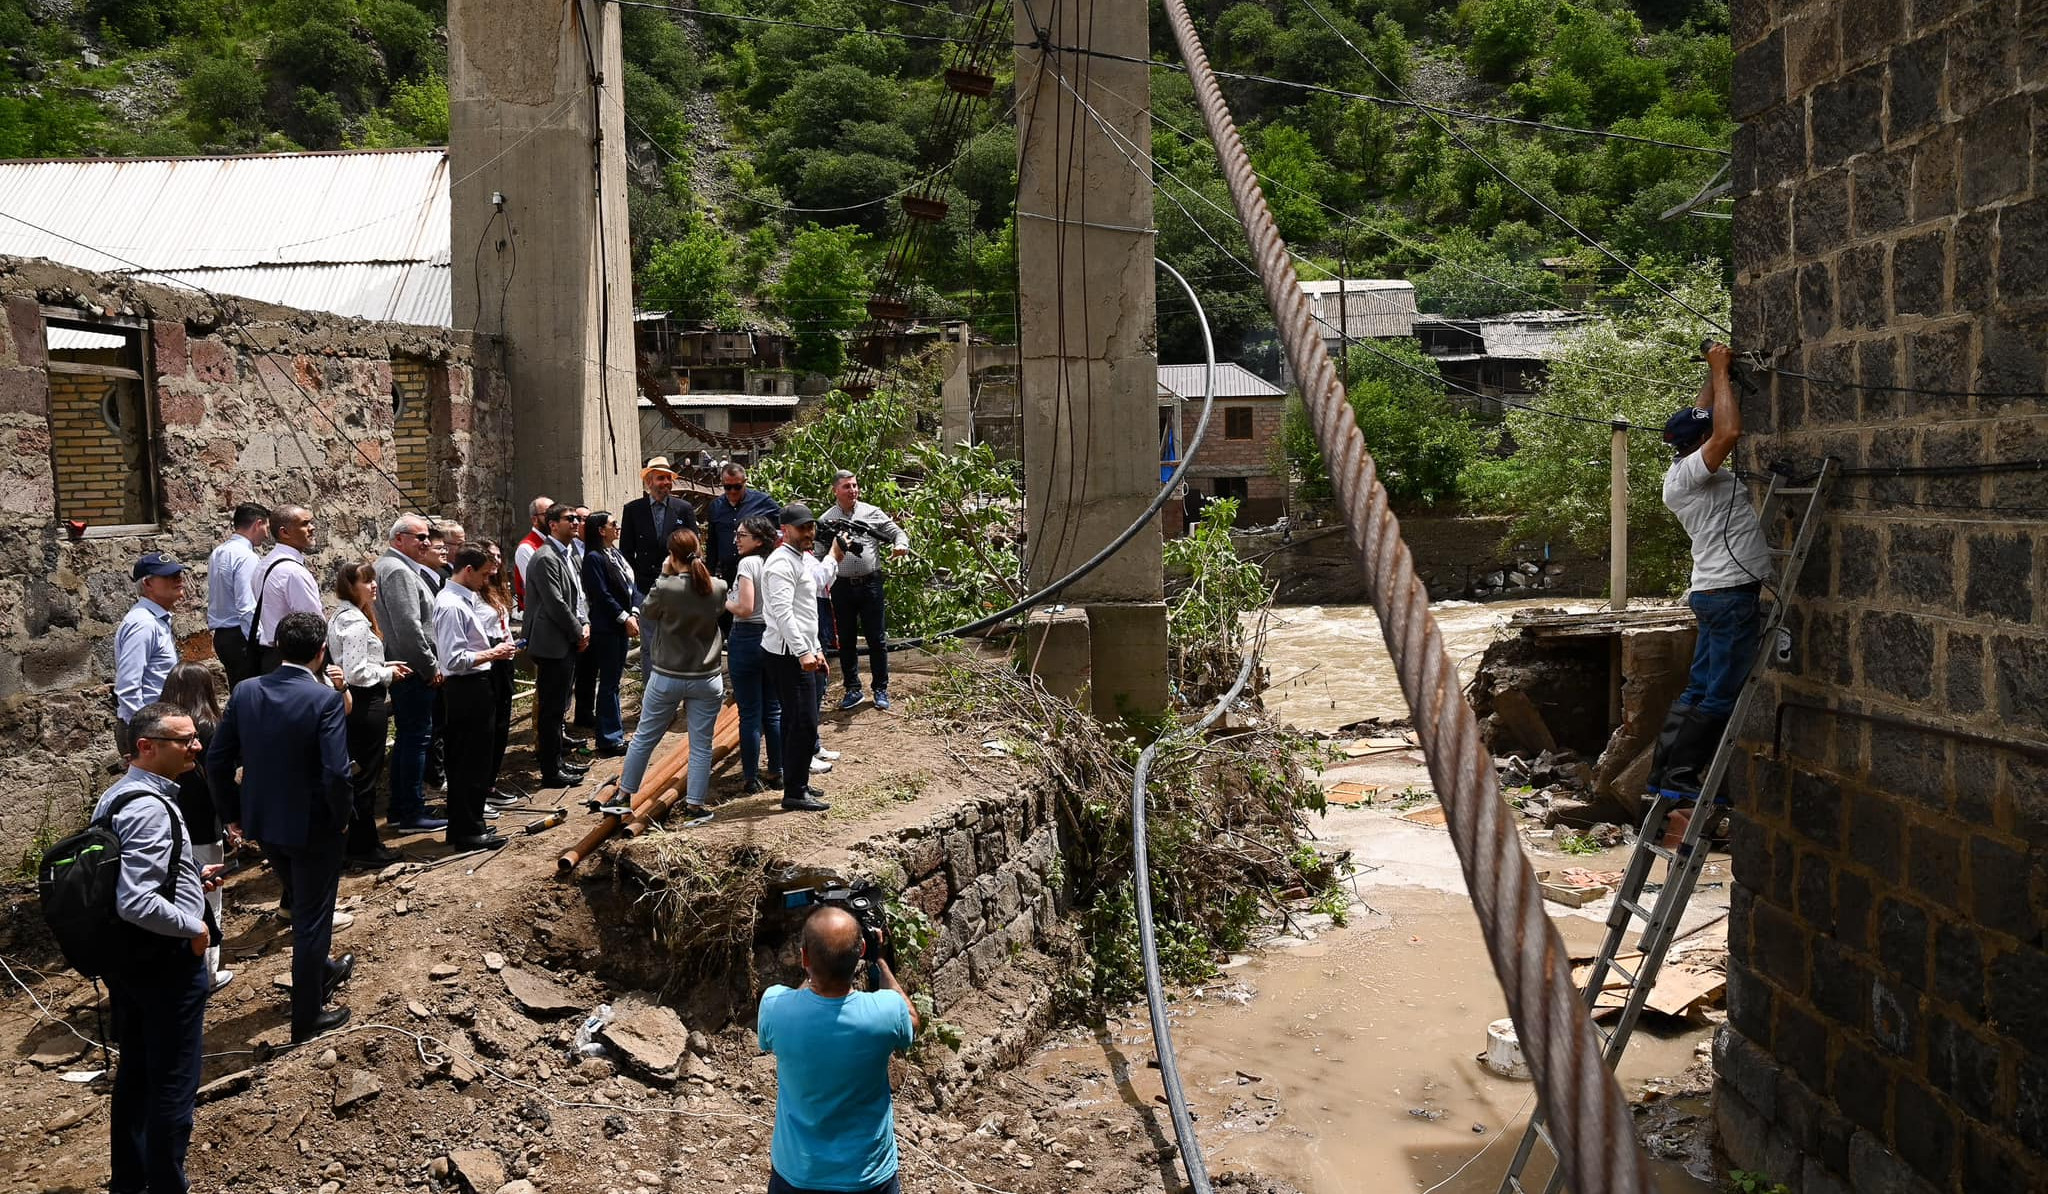 More than 40 representatives of diplomatic missions and international organizations visited disaster zone